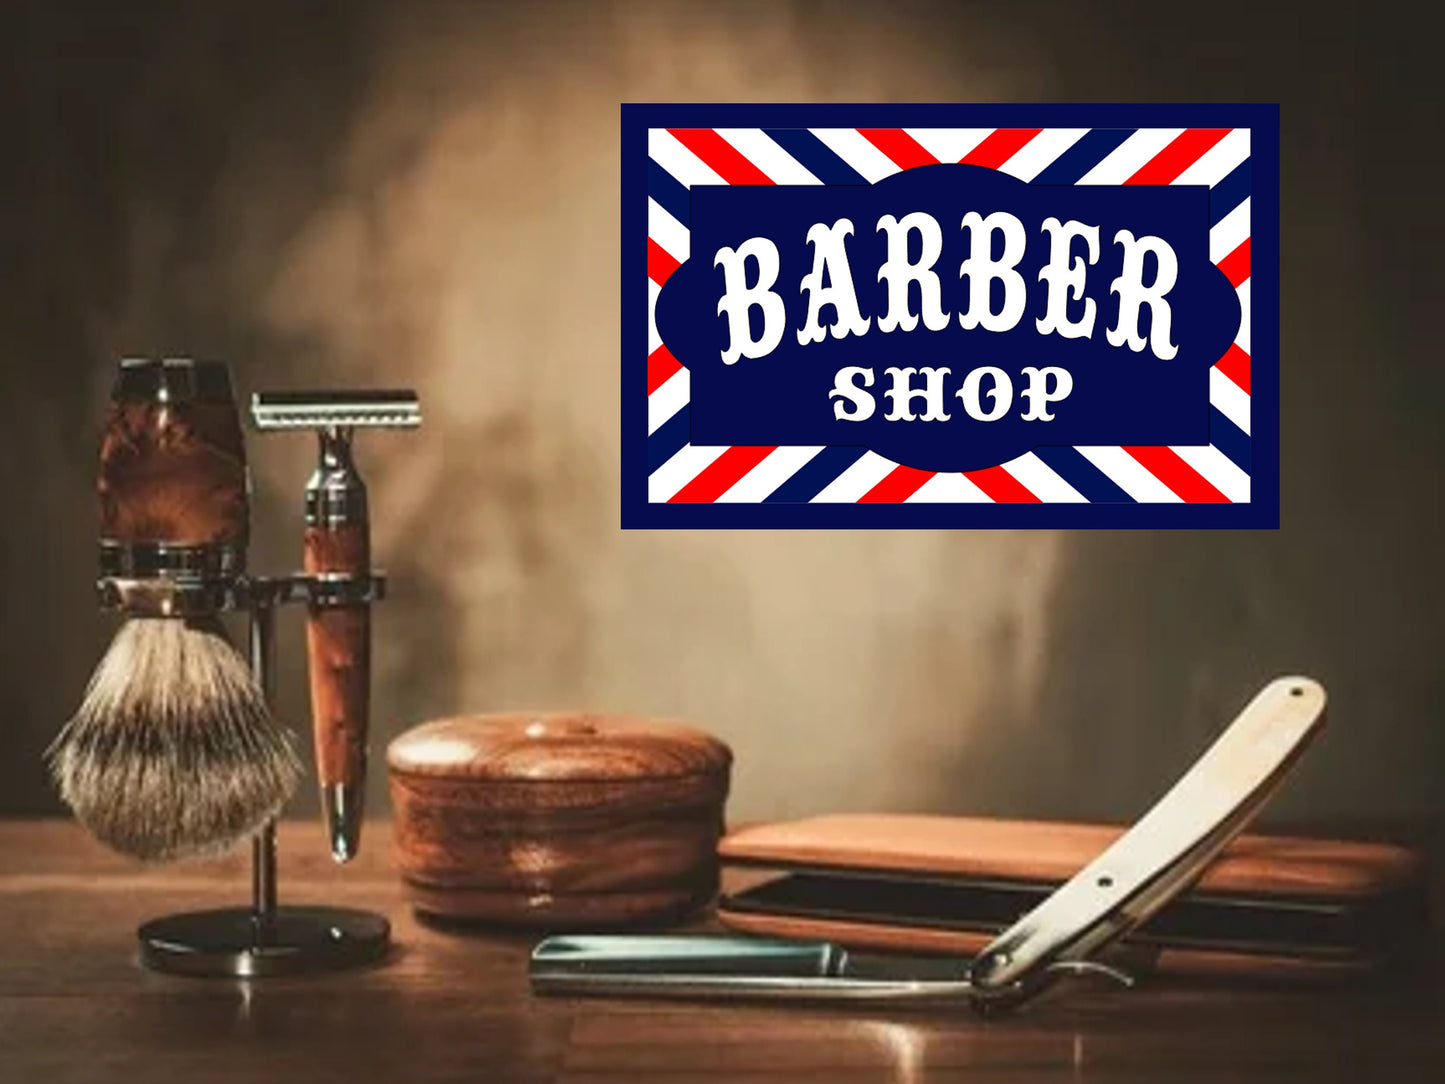 barber shop sign personalised options